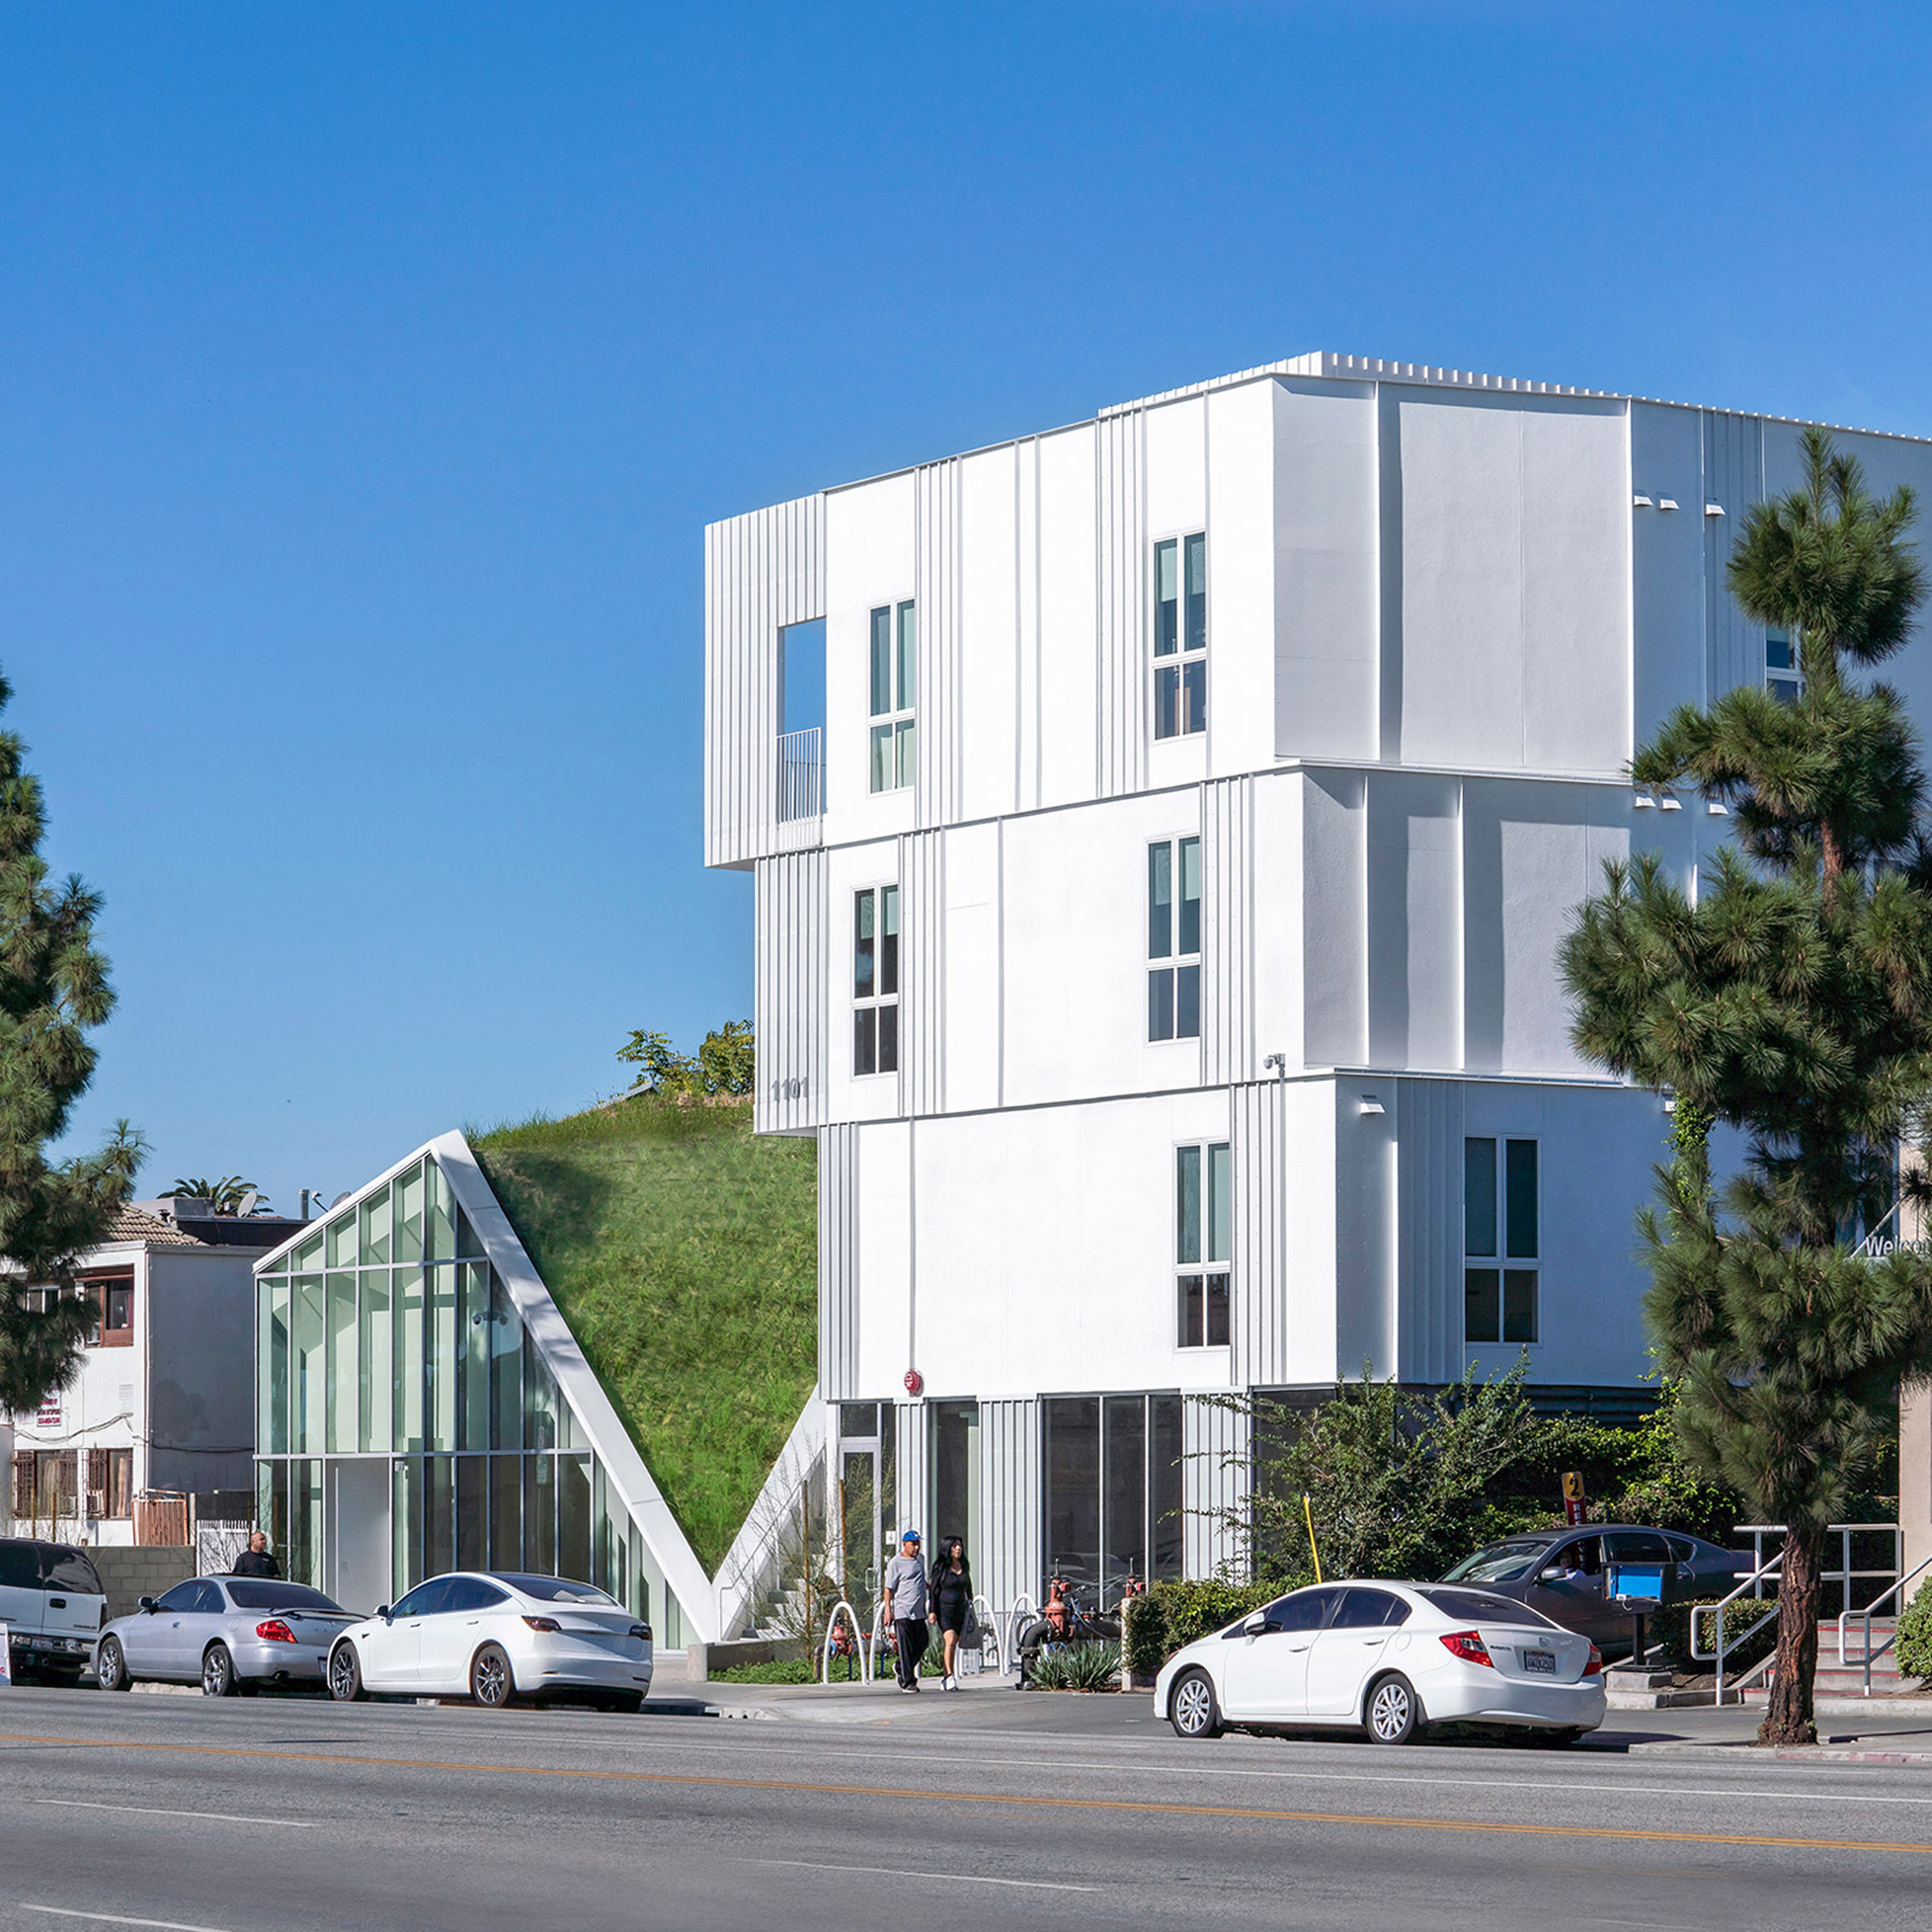 MLK1101 Supportive Housing by LOHA